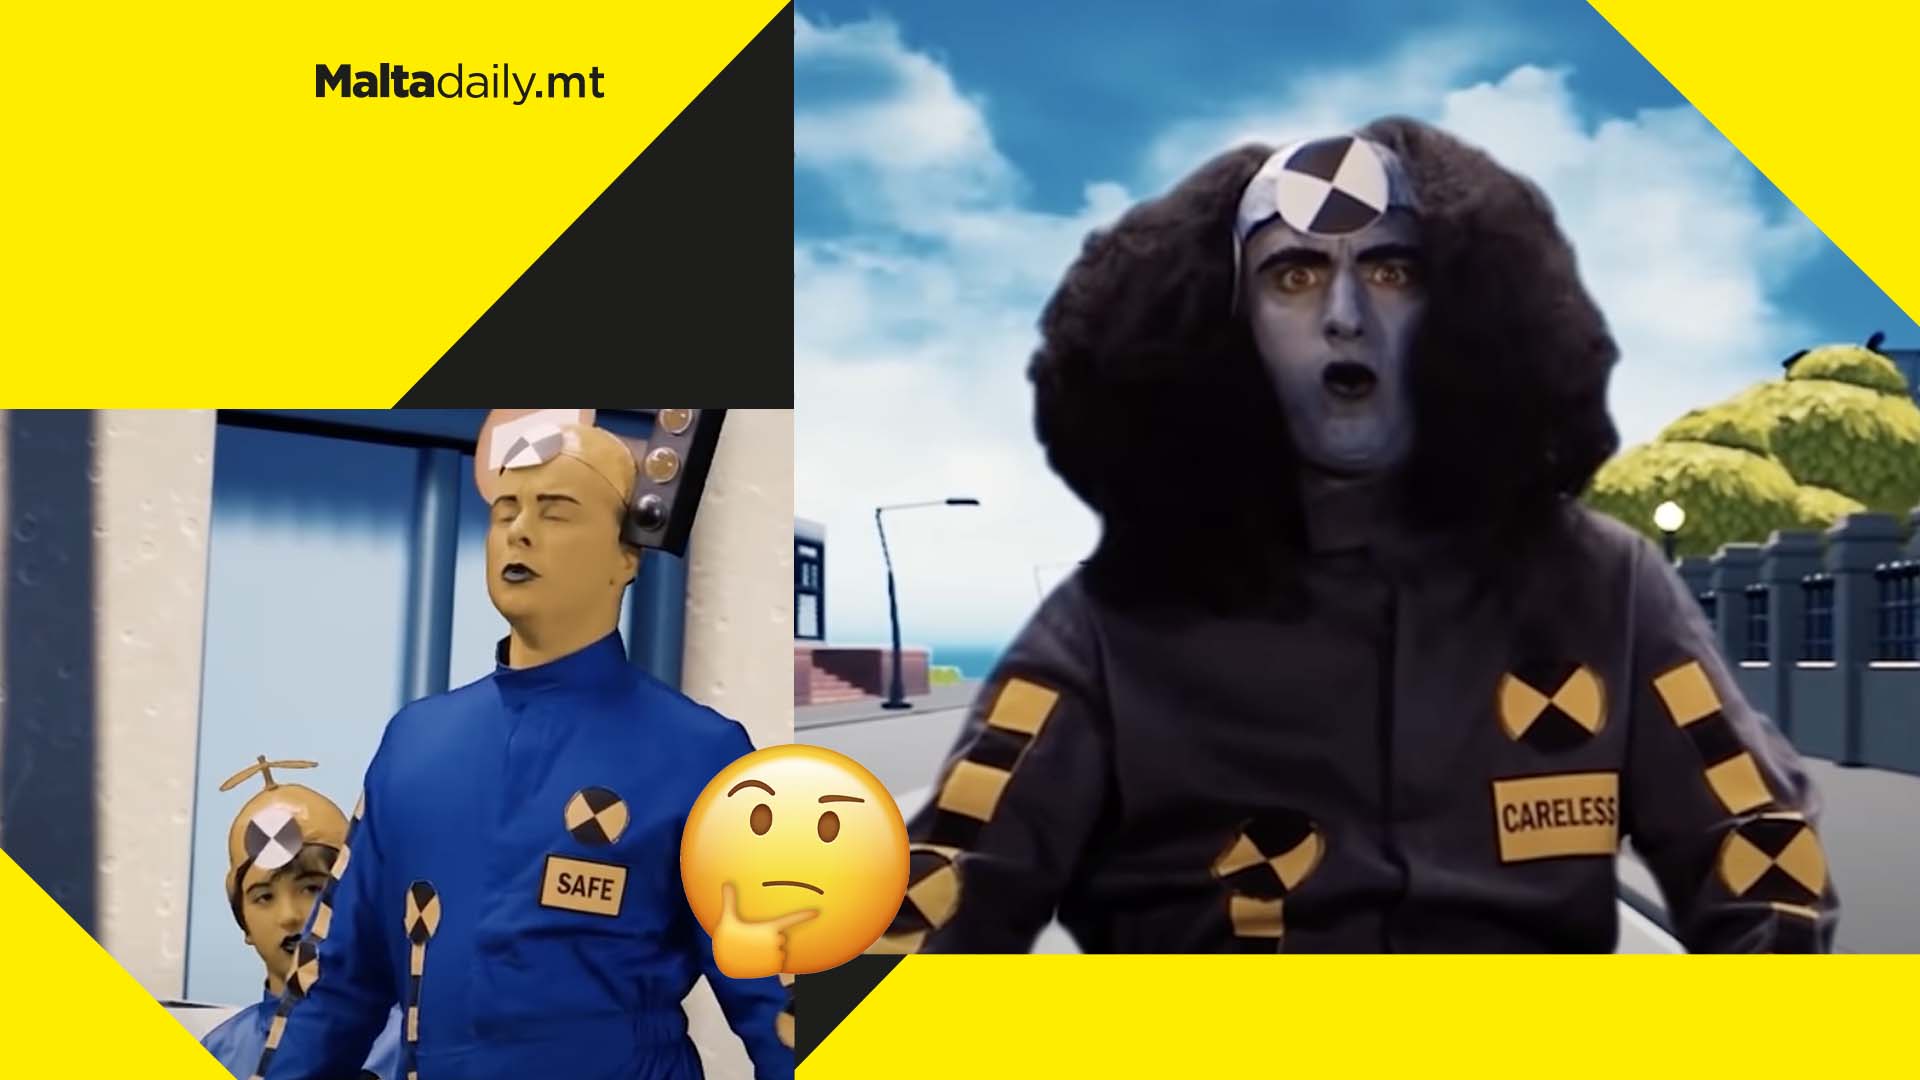 Local road safety advert featuring black face gets slammed as racist